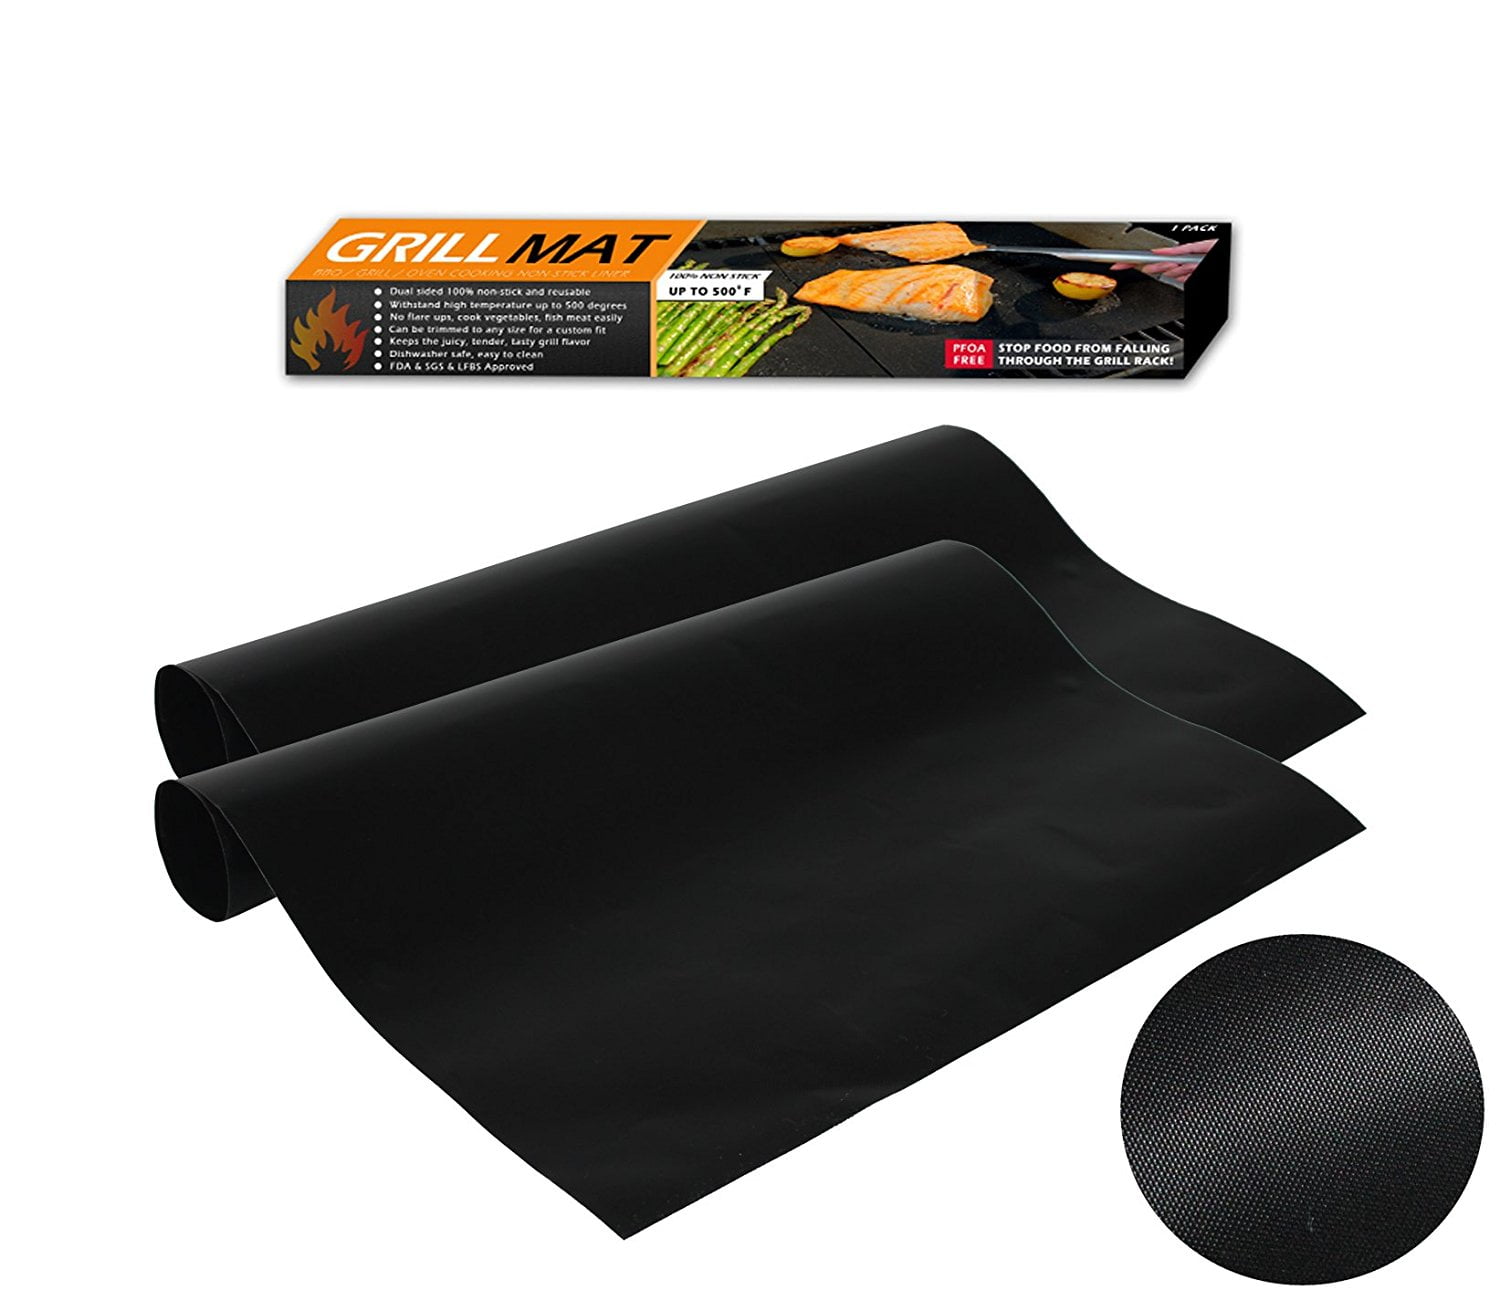 NON STICK REUSEABLE  33 X 40 COOKING LINER FOR FAT FREE COOKING TURKEY FREE P&P 